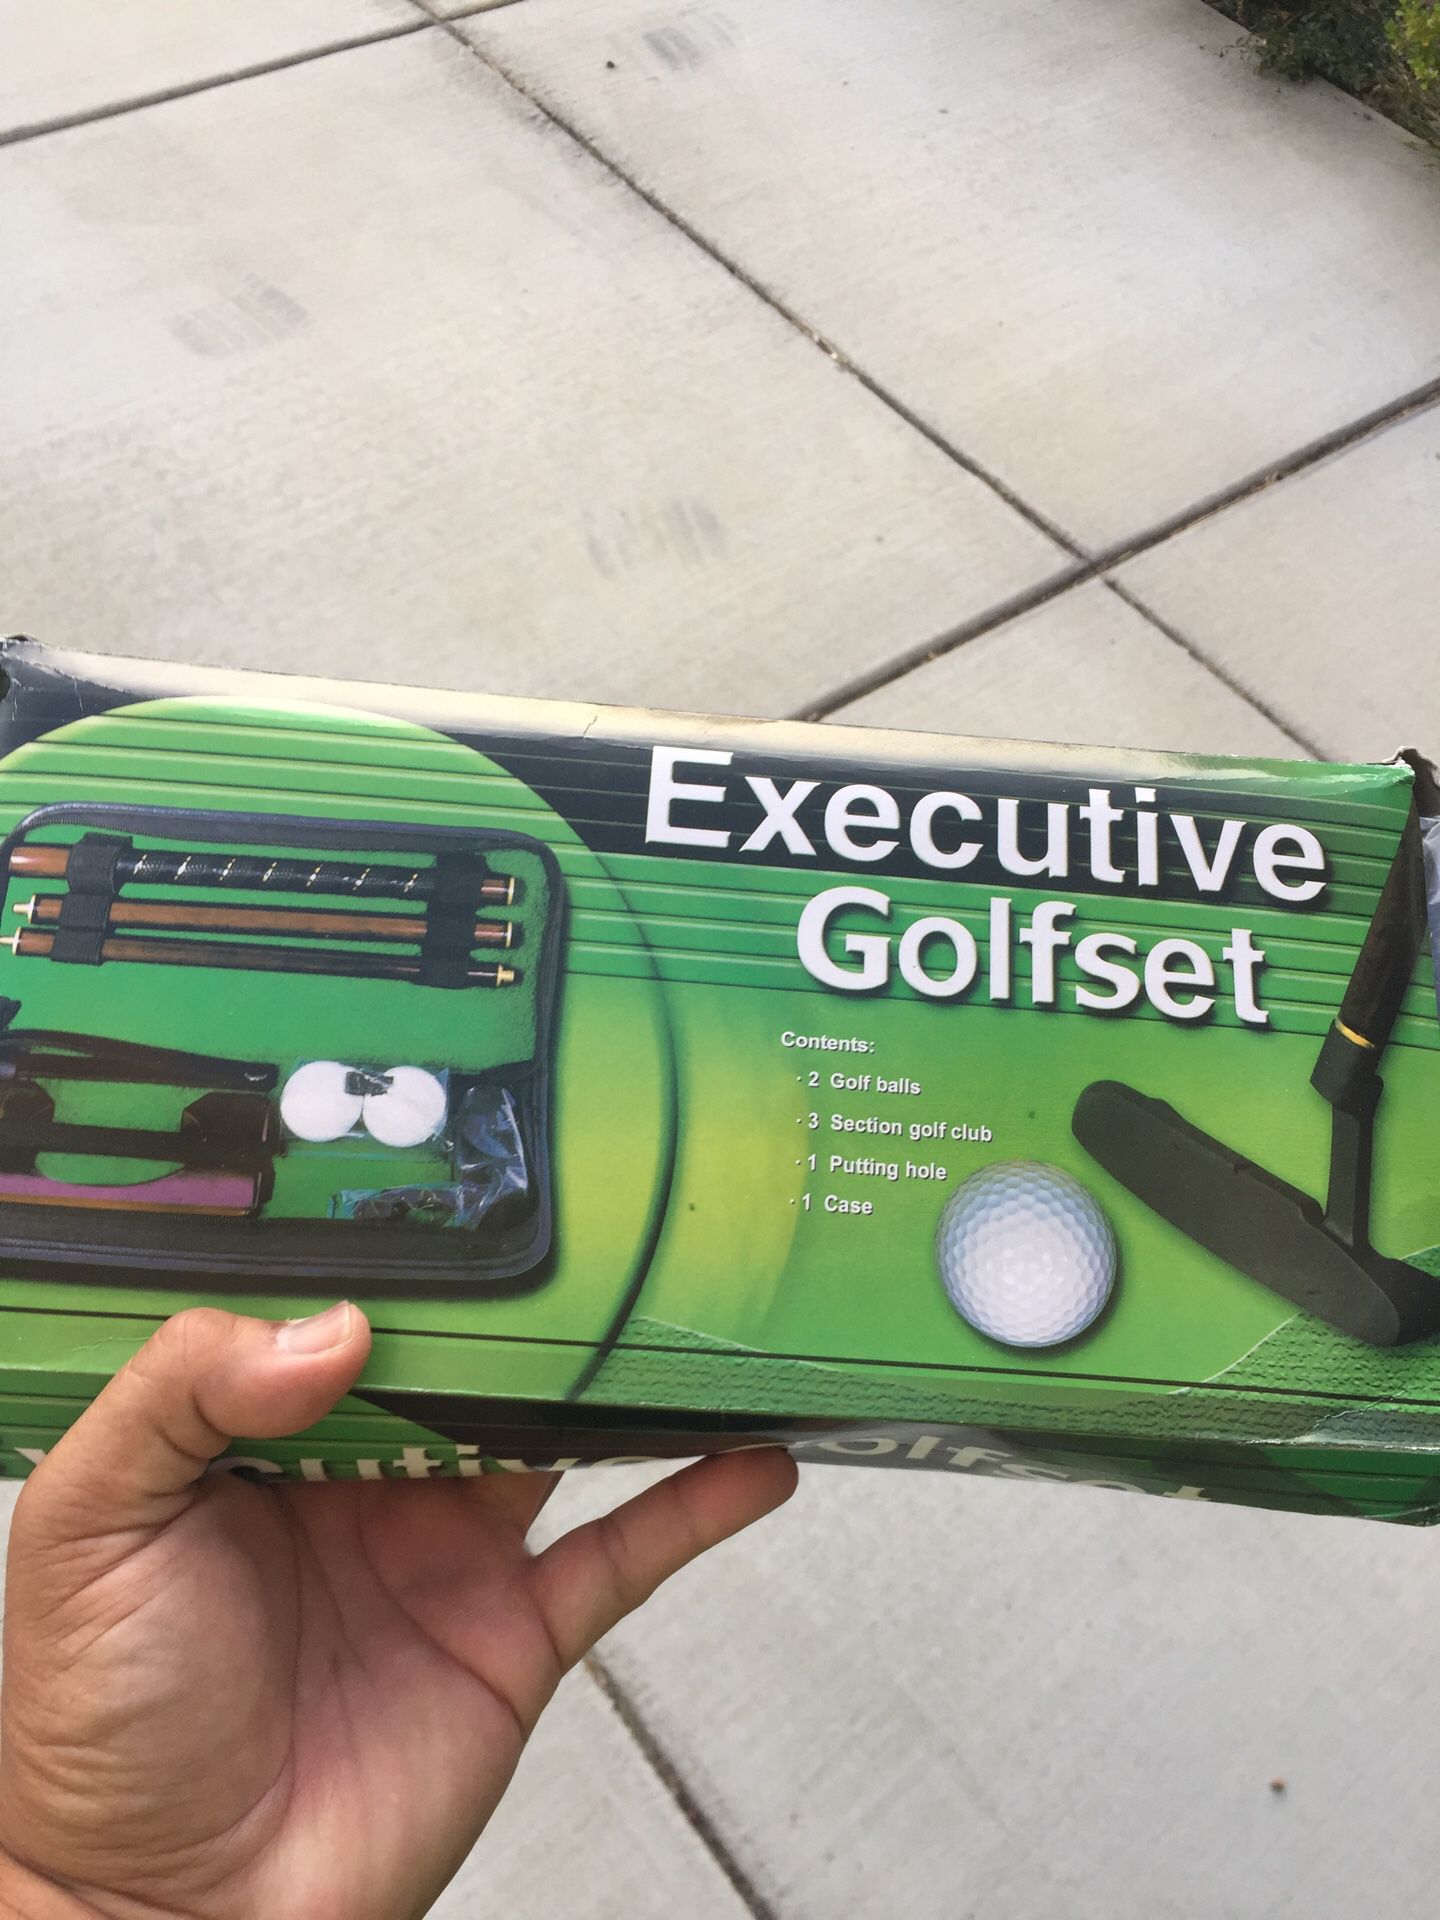 Executive golfset (new in box)